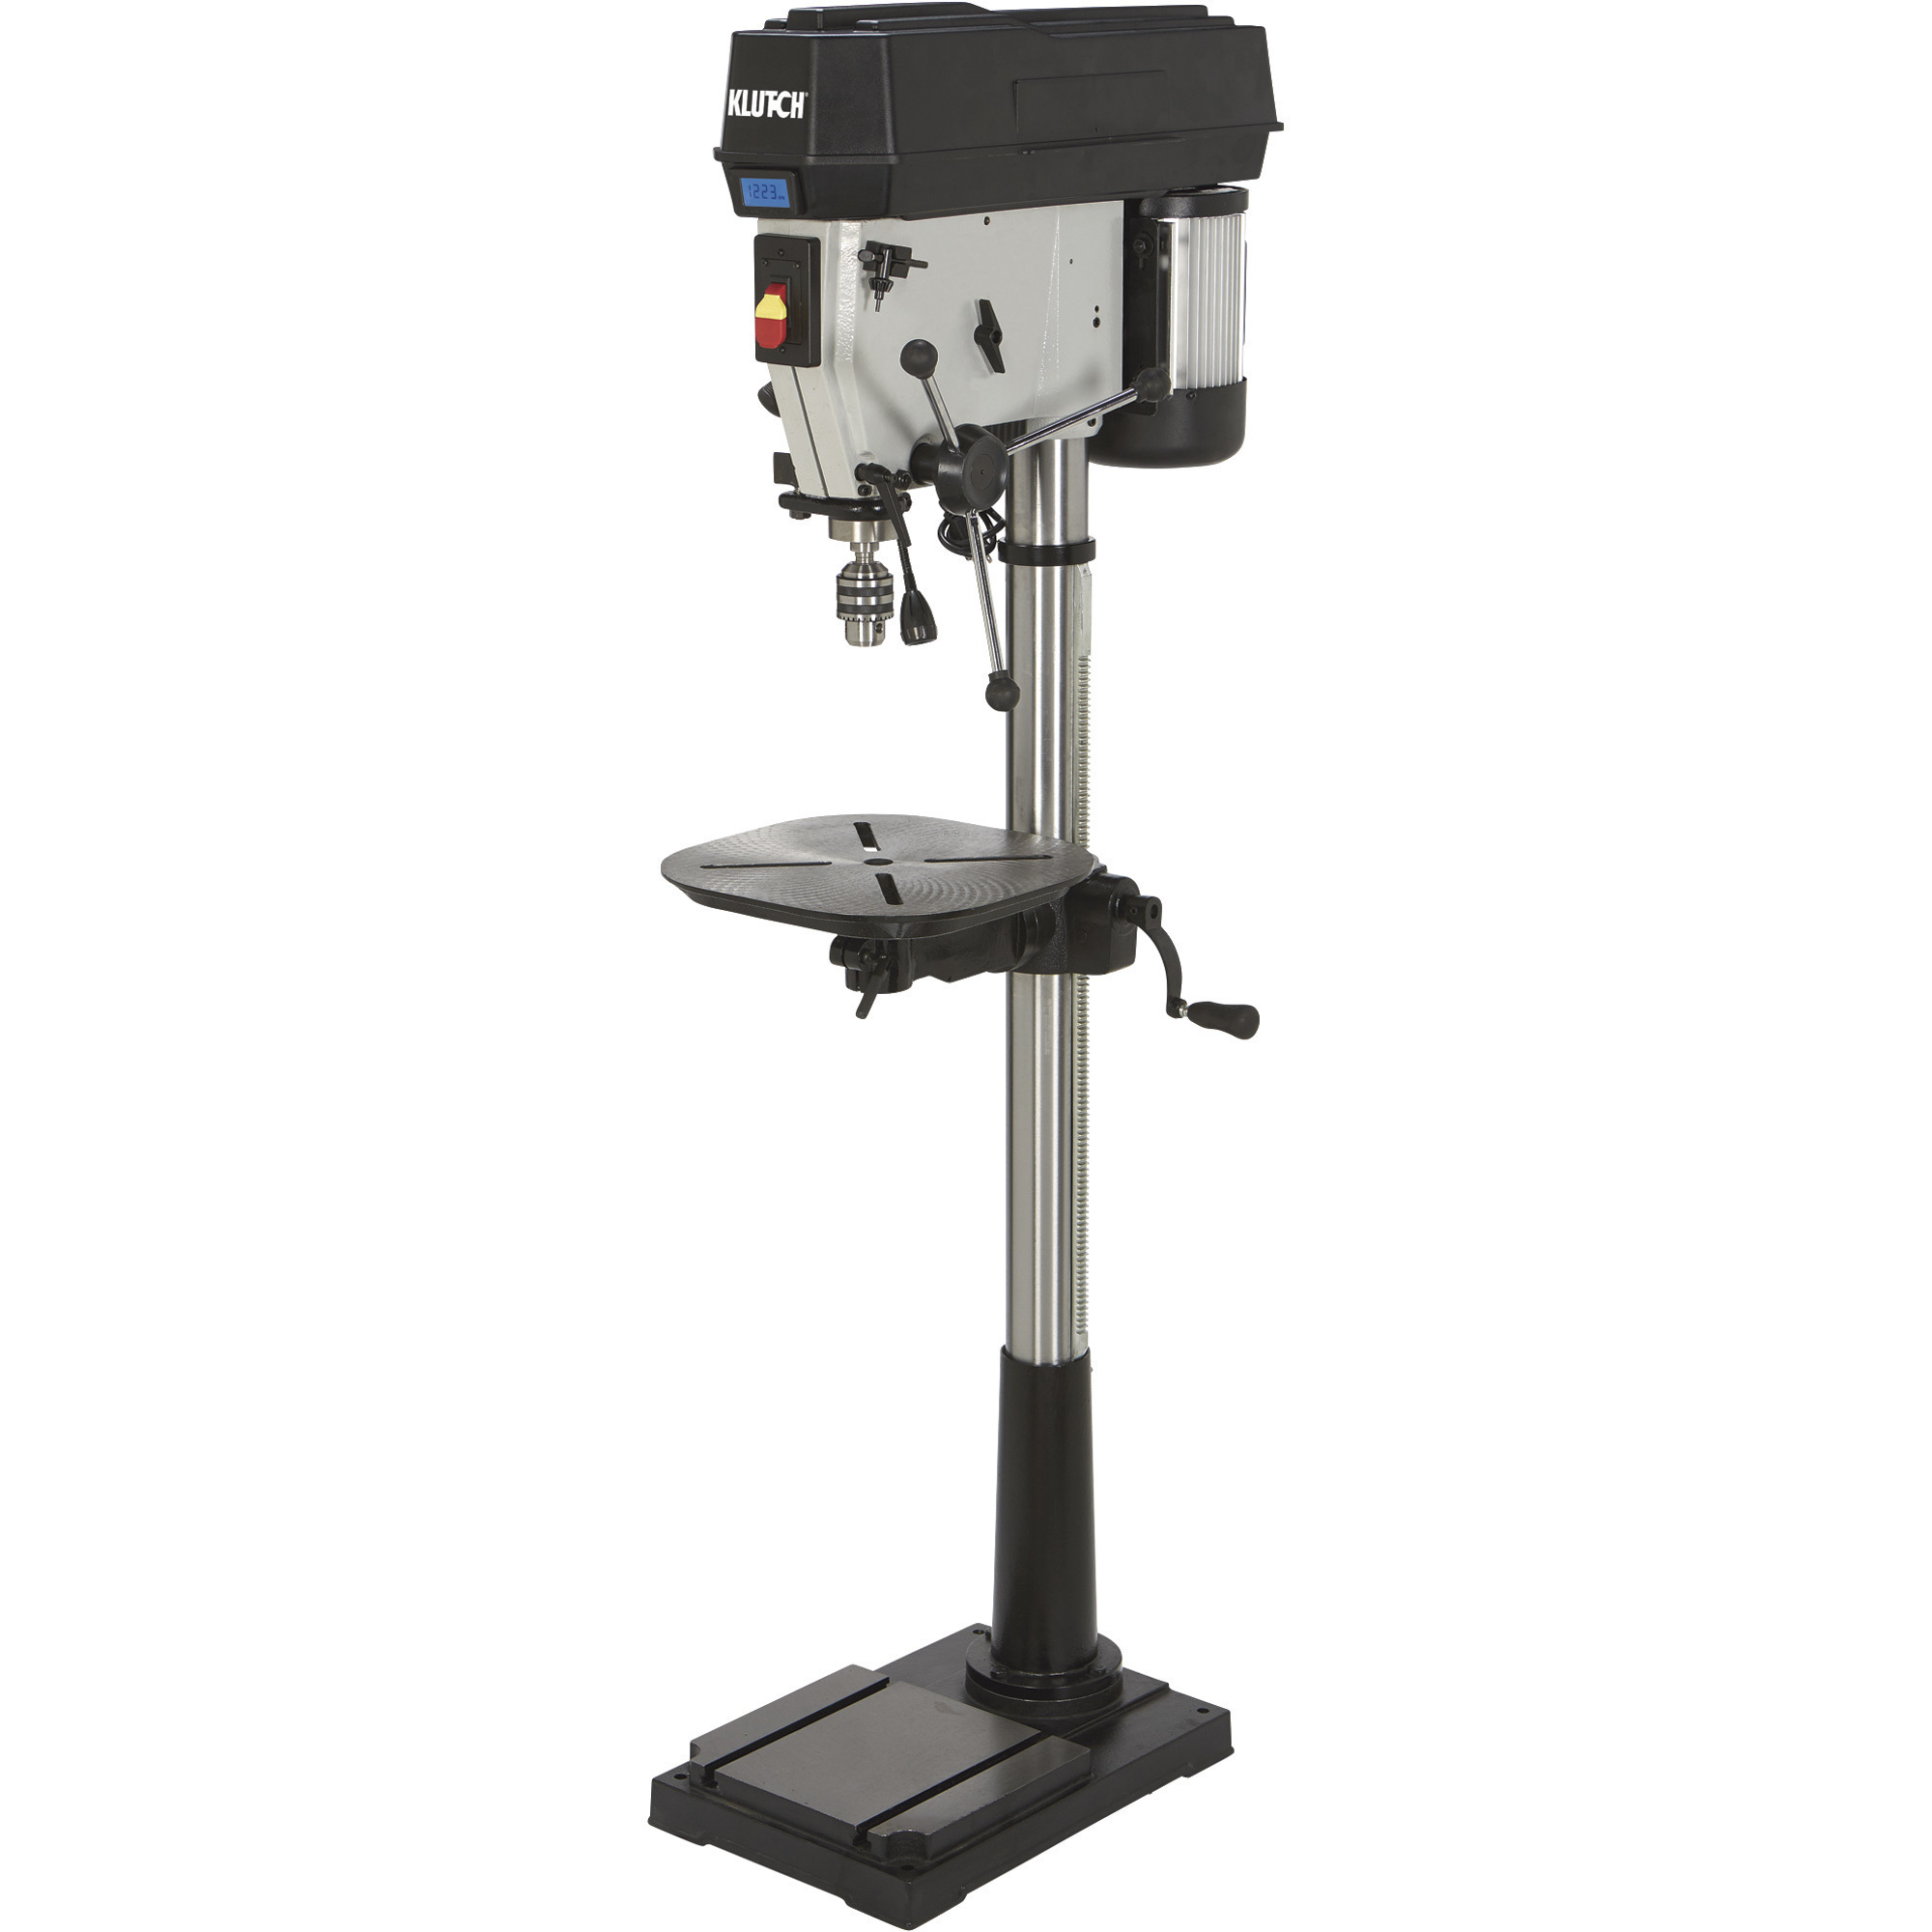 Klutch Floor Drill Press, Variable Speed with Digital Display, 17Inch, 1 1/2 HP, 120V